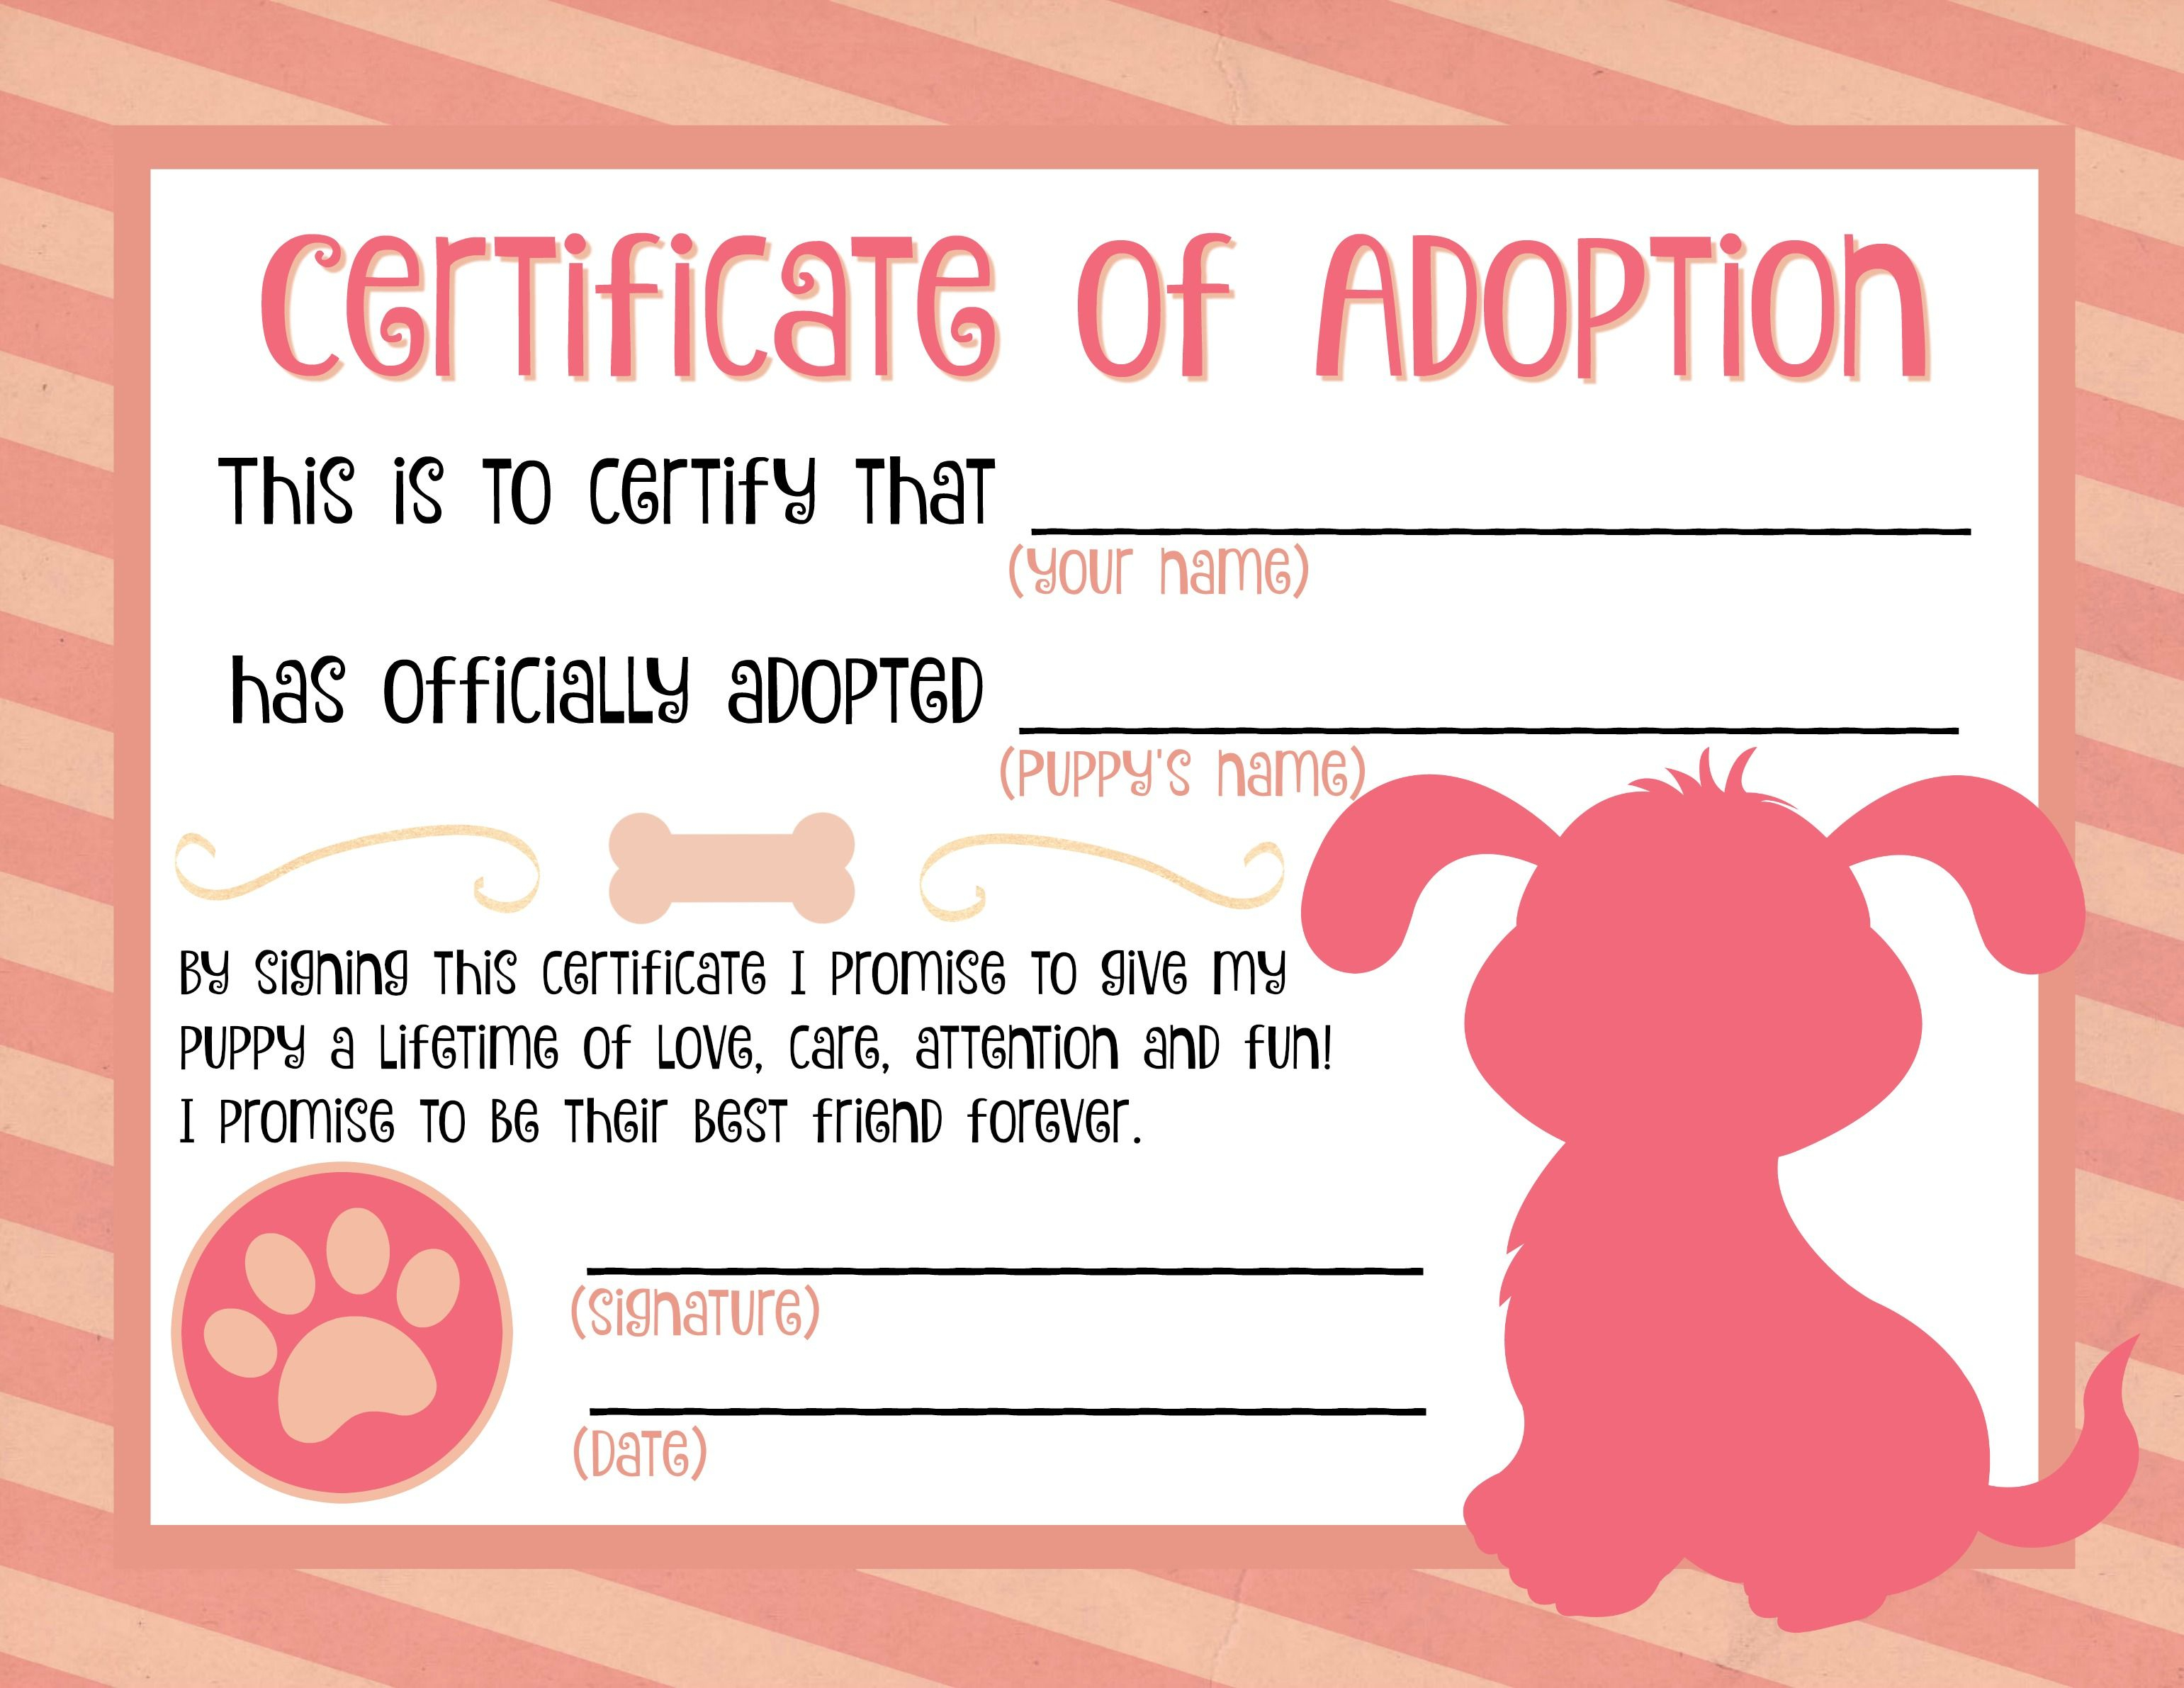 Puppy Adoption Certificate … | Party Ideas In 2019 | Puppy With Toy Adoption Certificate Template